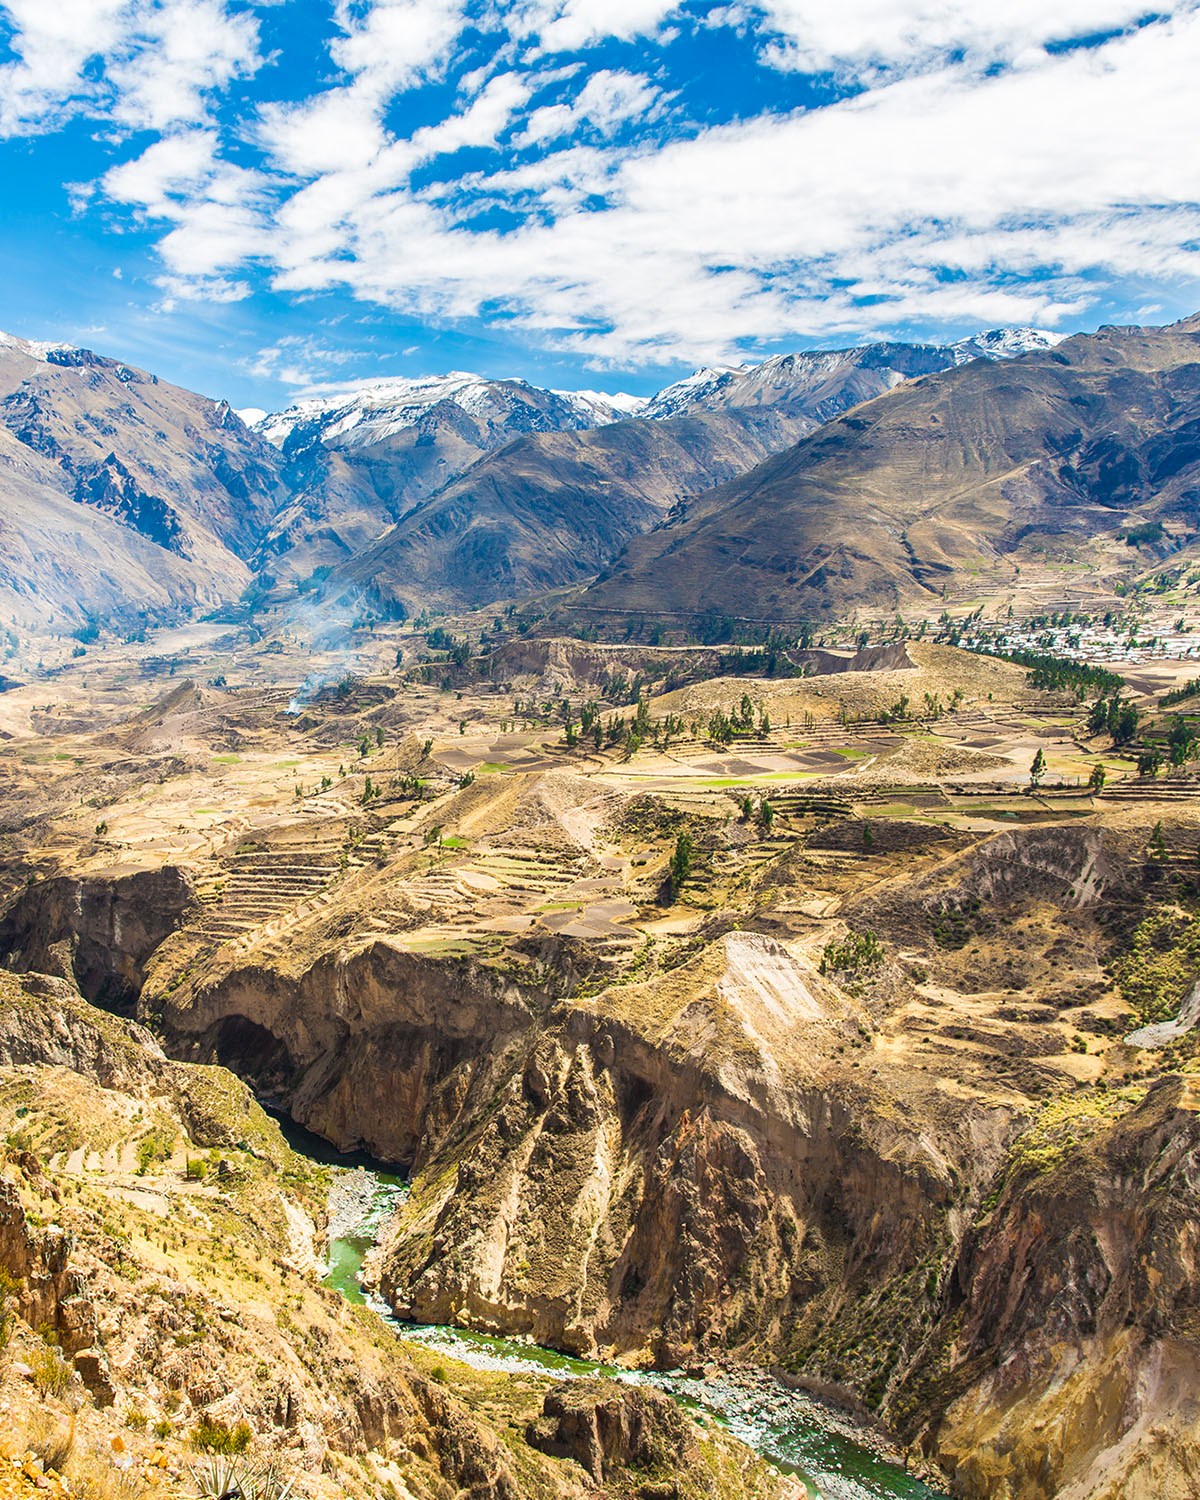 Colca Canyon, one of the world's deepest canyons - 